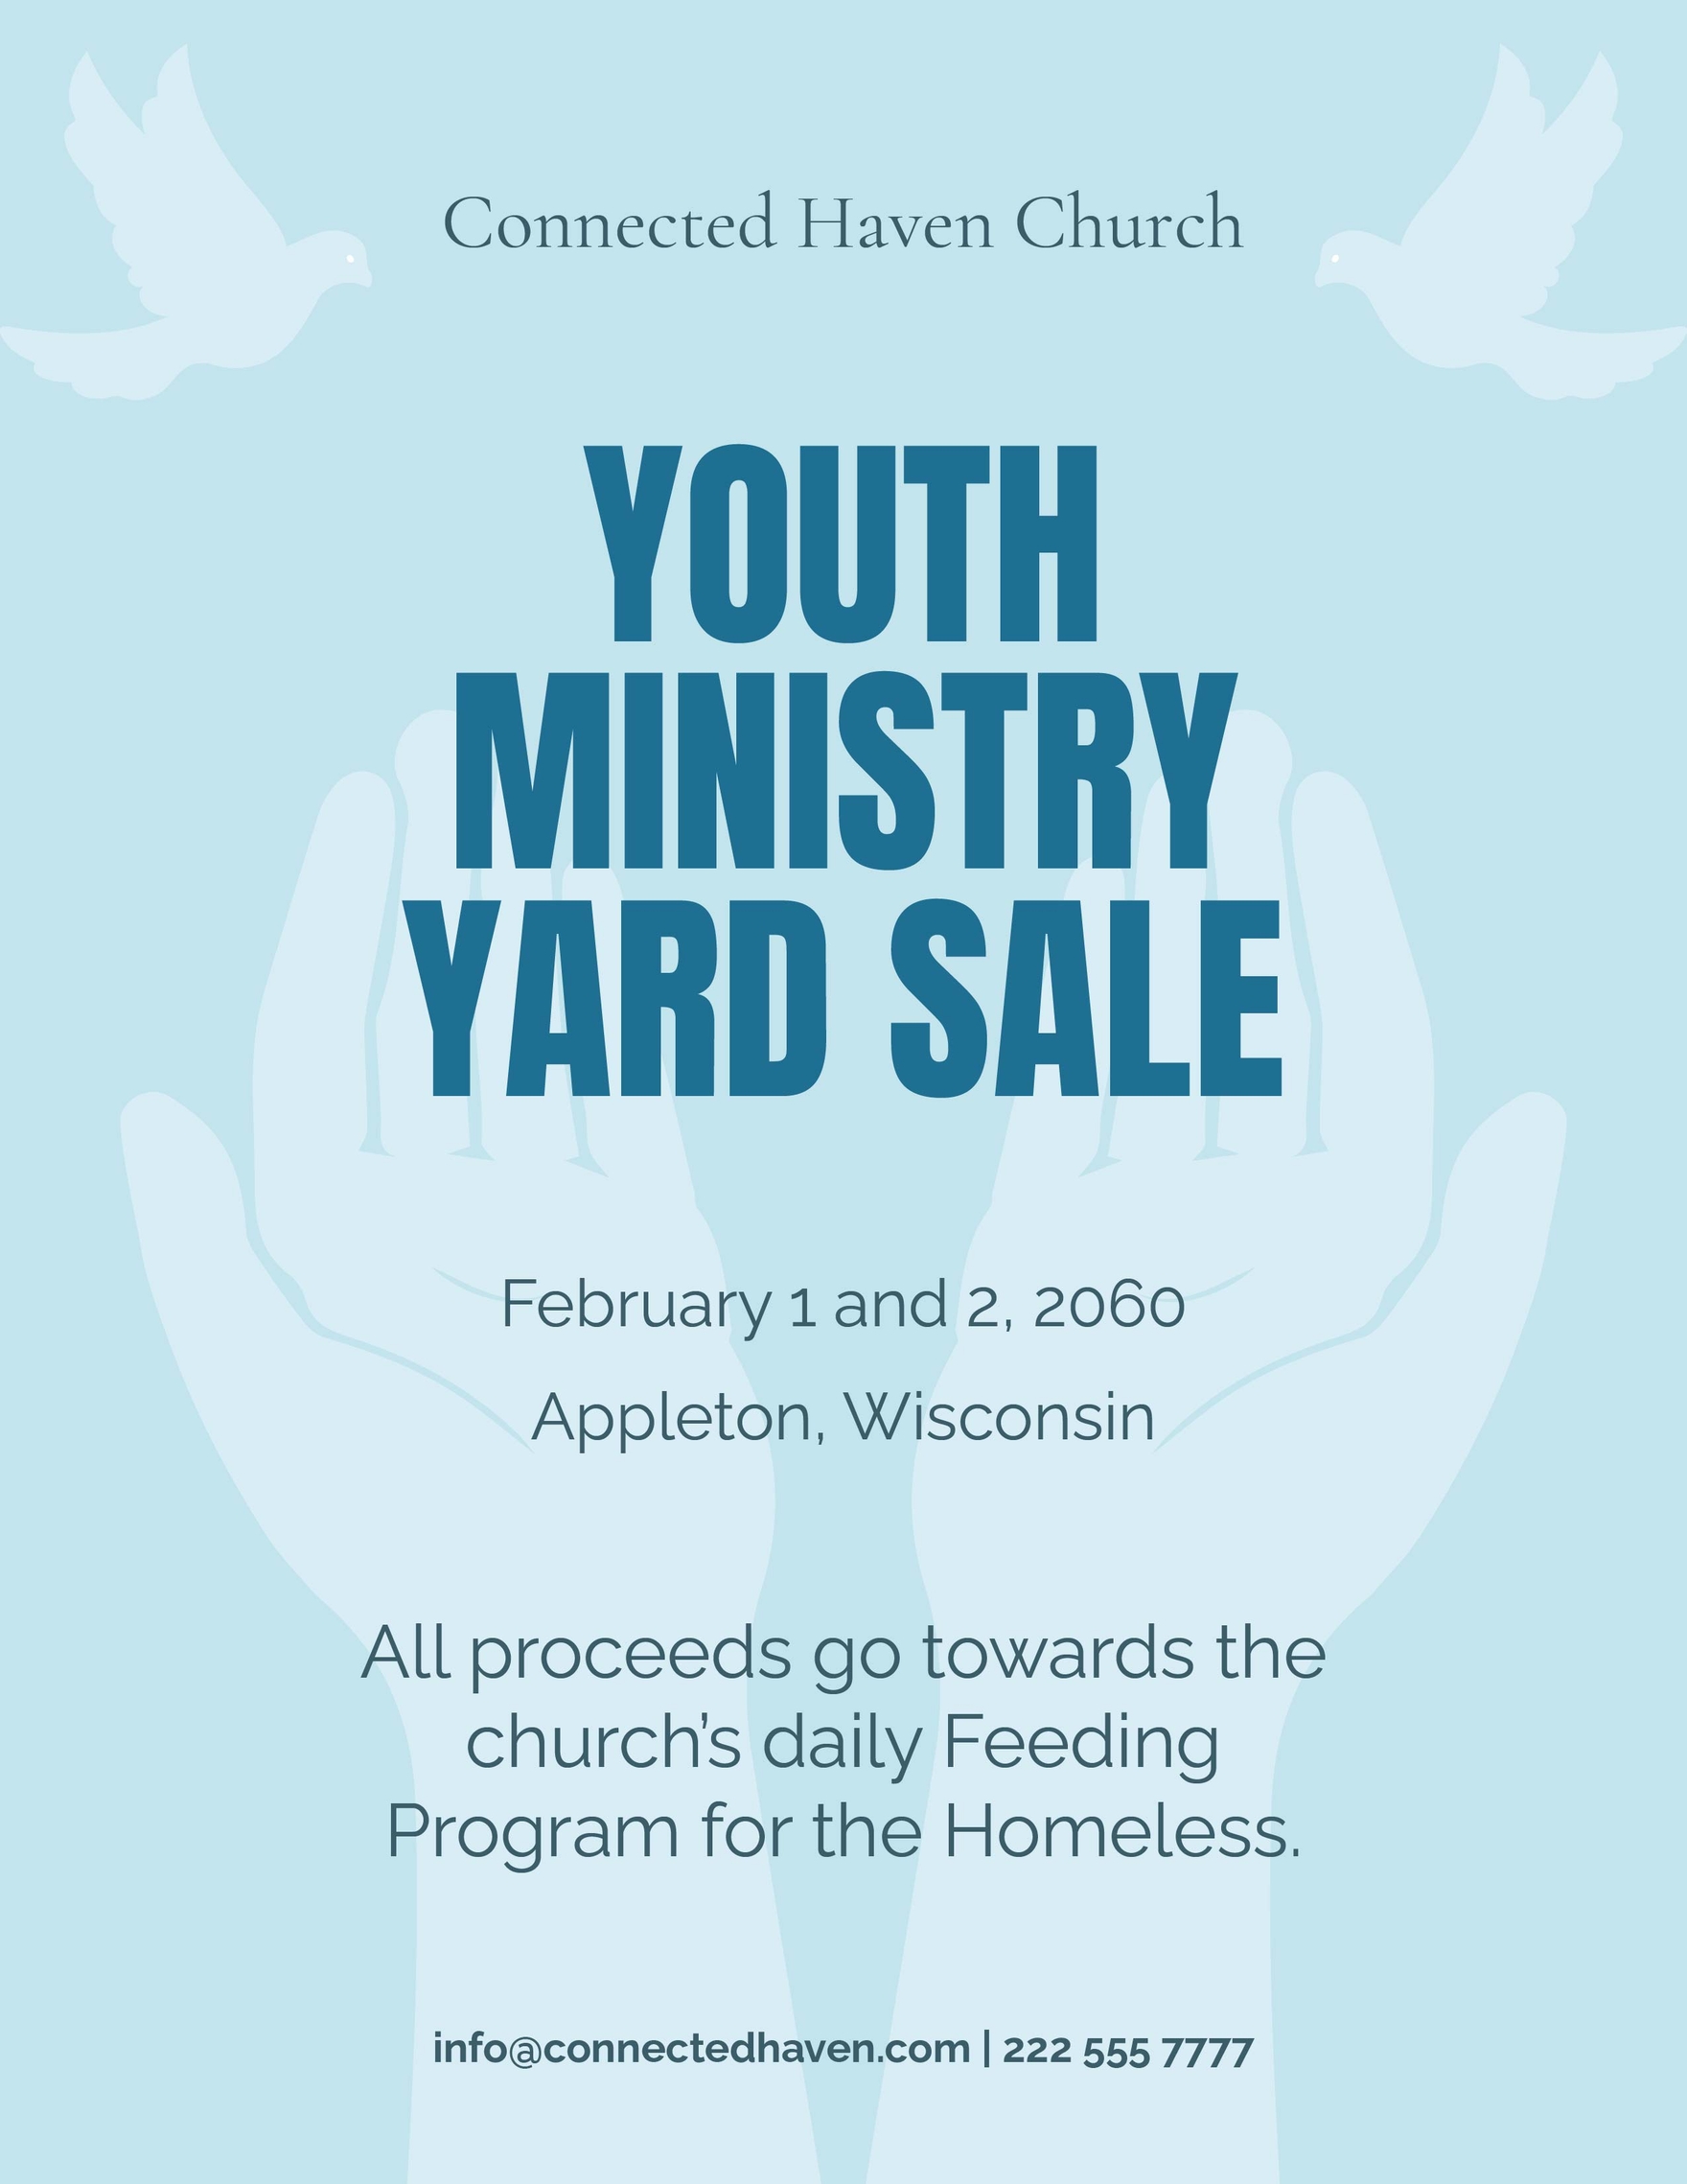 Church Yard Sale Flyer Template Download In Word Google Docs Illustrator PSD Apple Pages